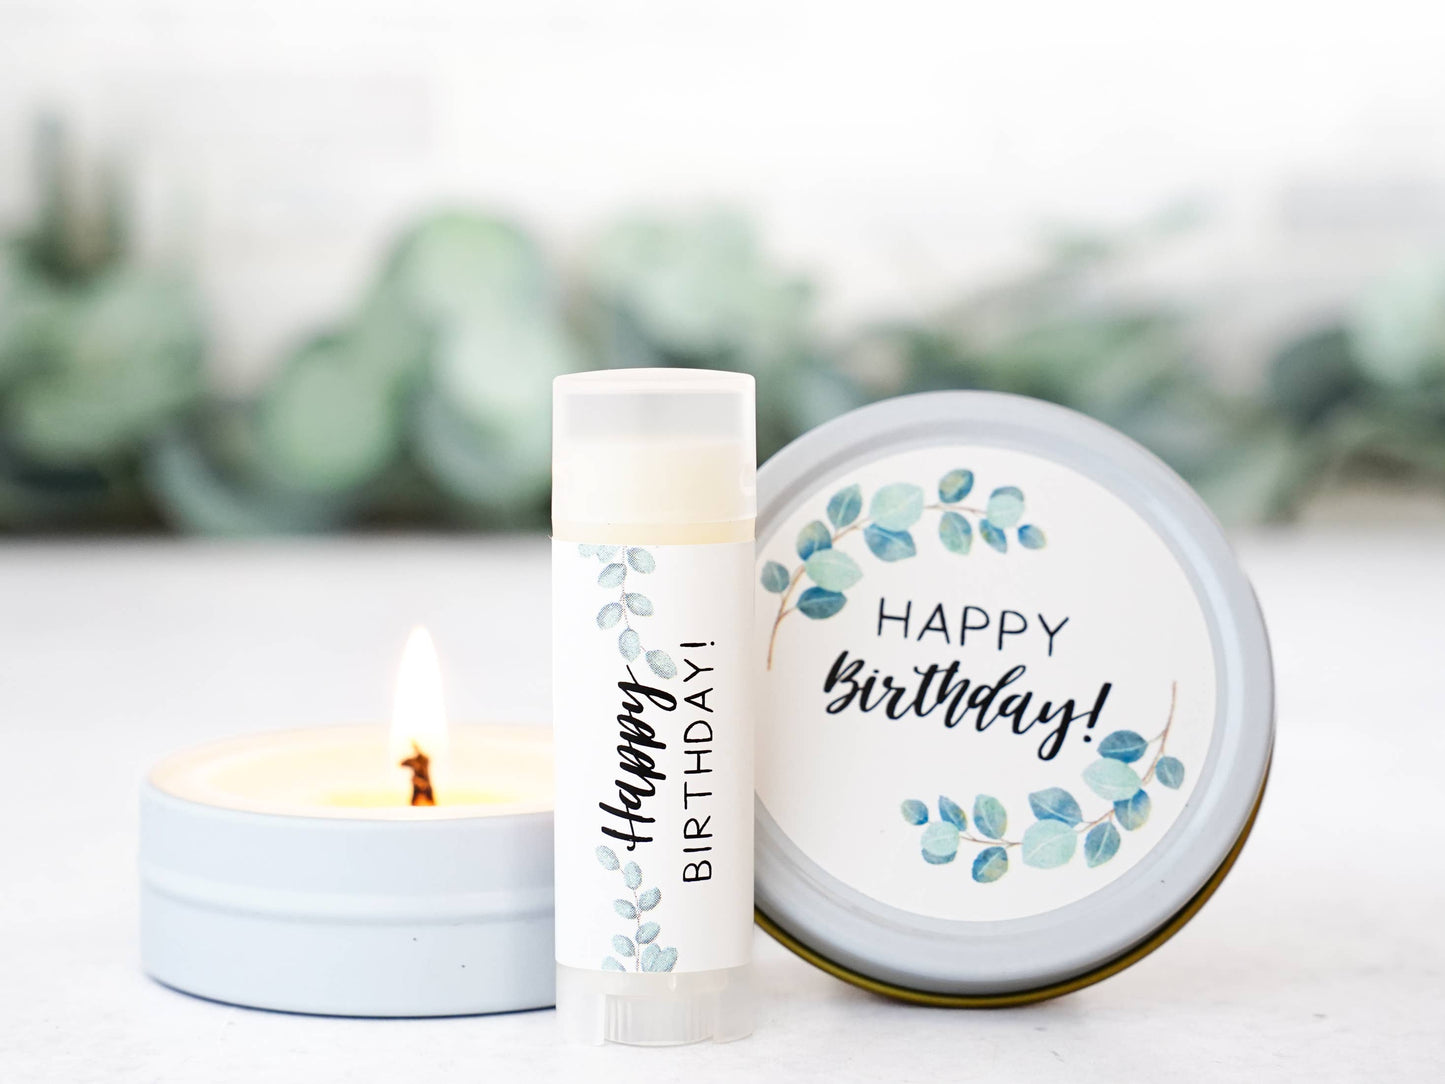 Happy Birthday Gift - Small favor or gift: Candle and Lip Balm SET in drawstring bag / Lavender